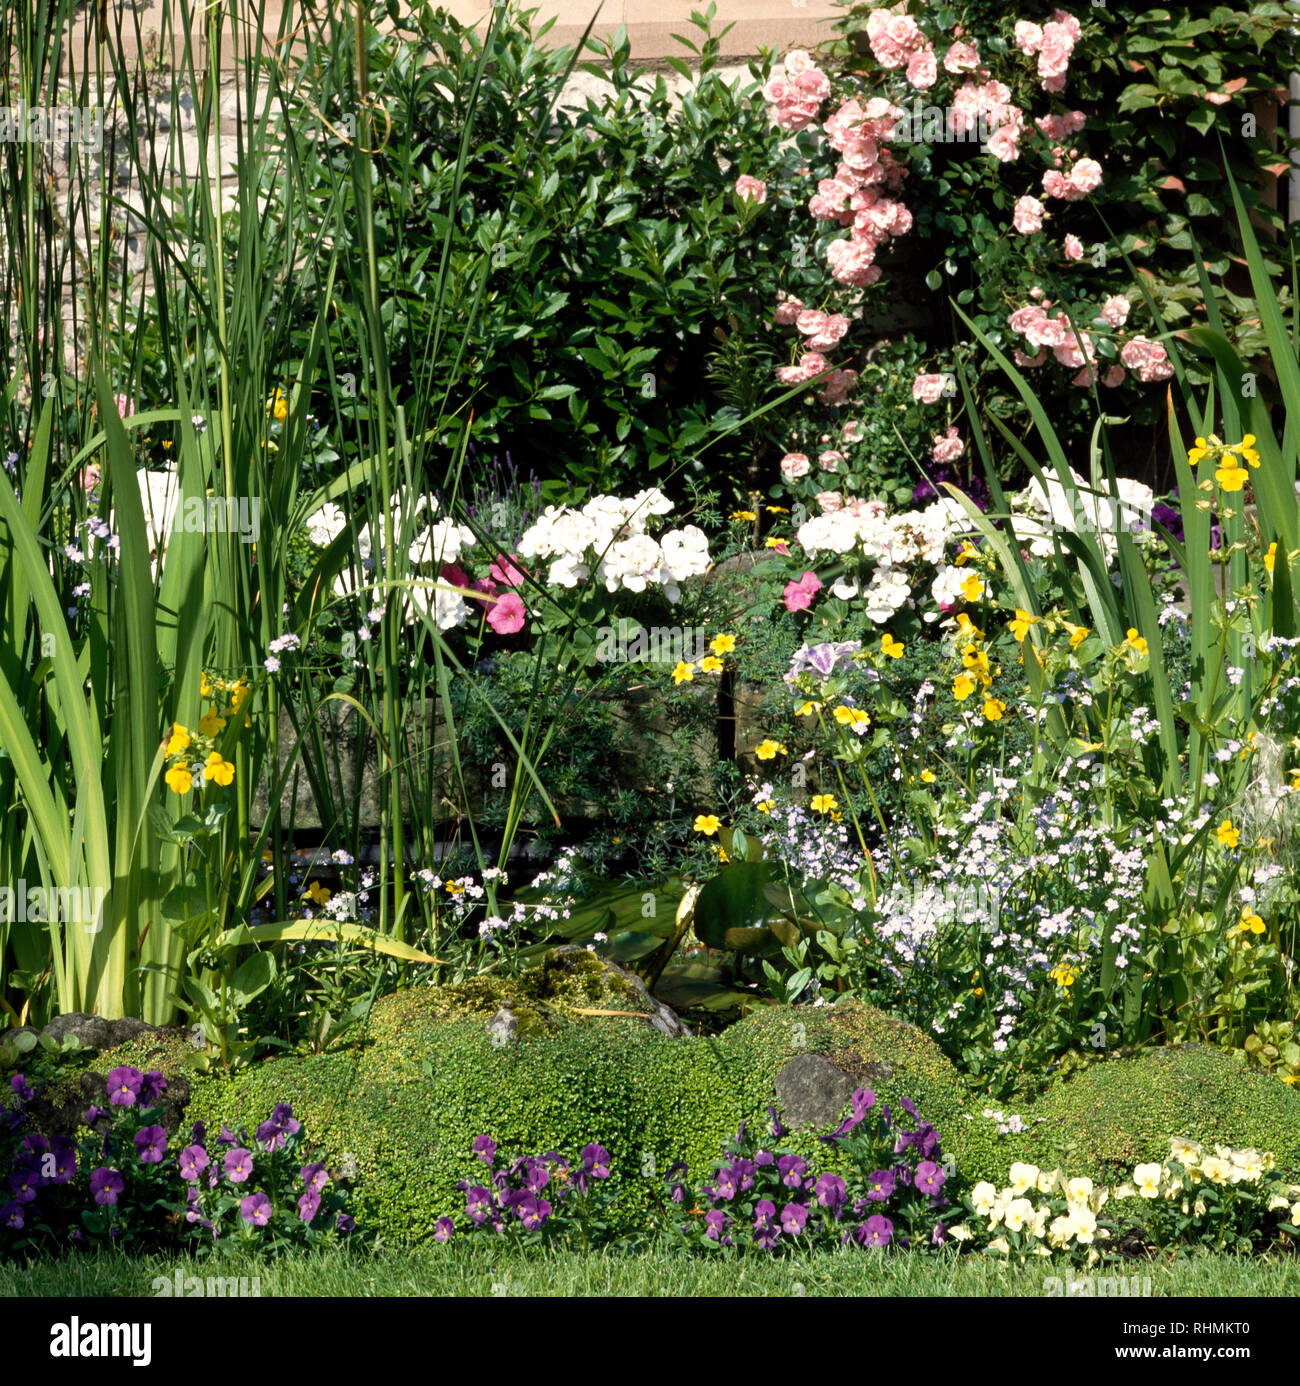 Small pond in summer garden surrounded by flowers Stock Photo